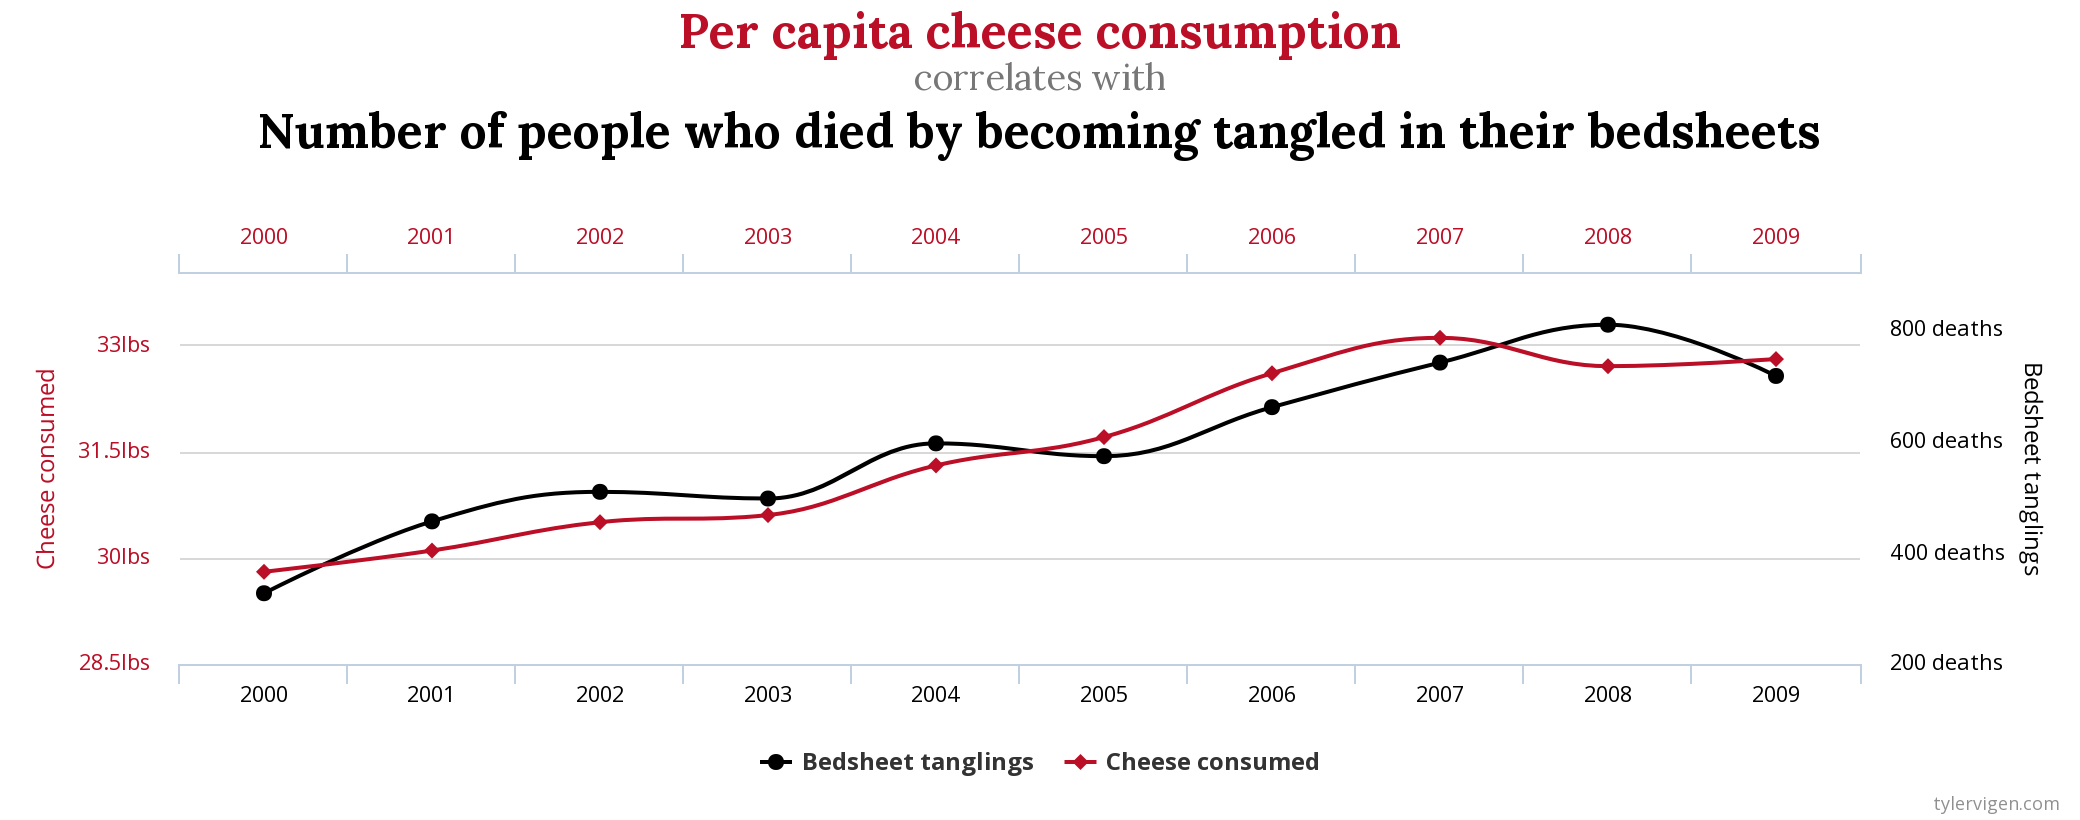 Chart Showing Cheese Consumption Correlation with Death by Tangled Bedsheets